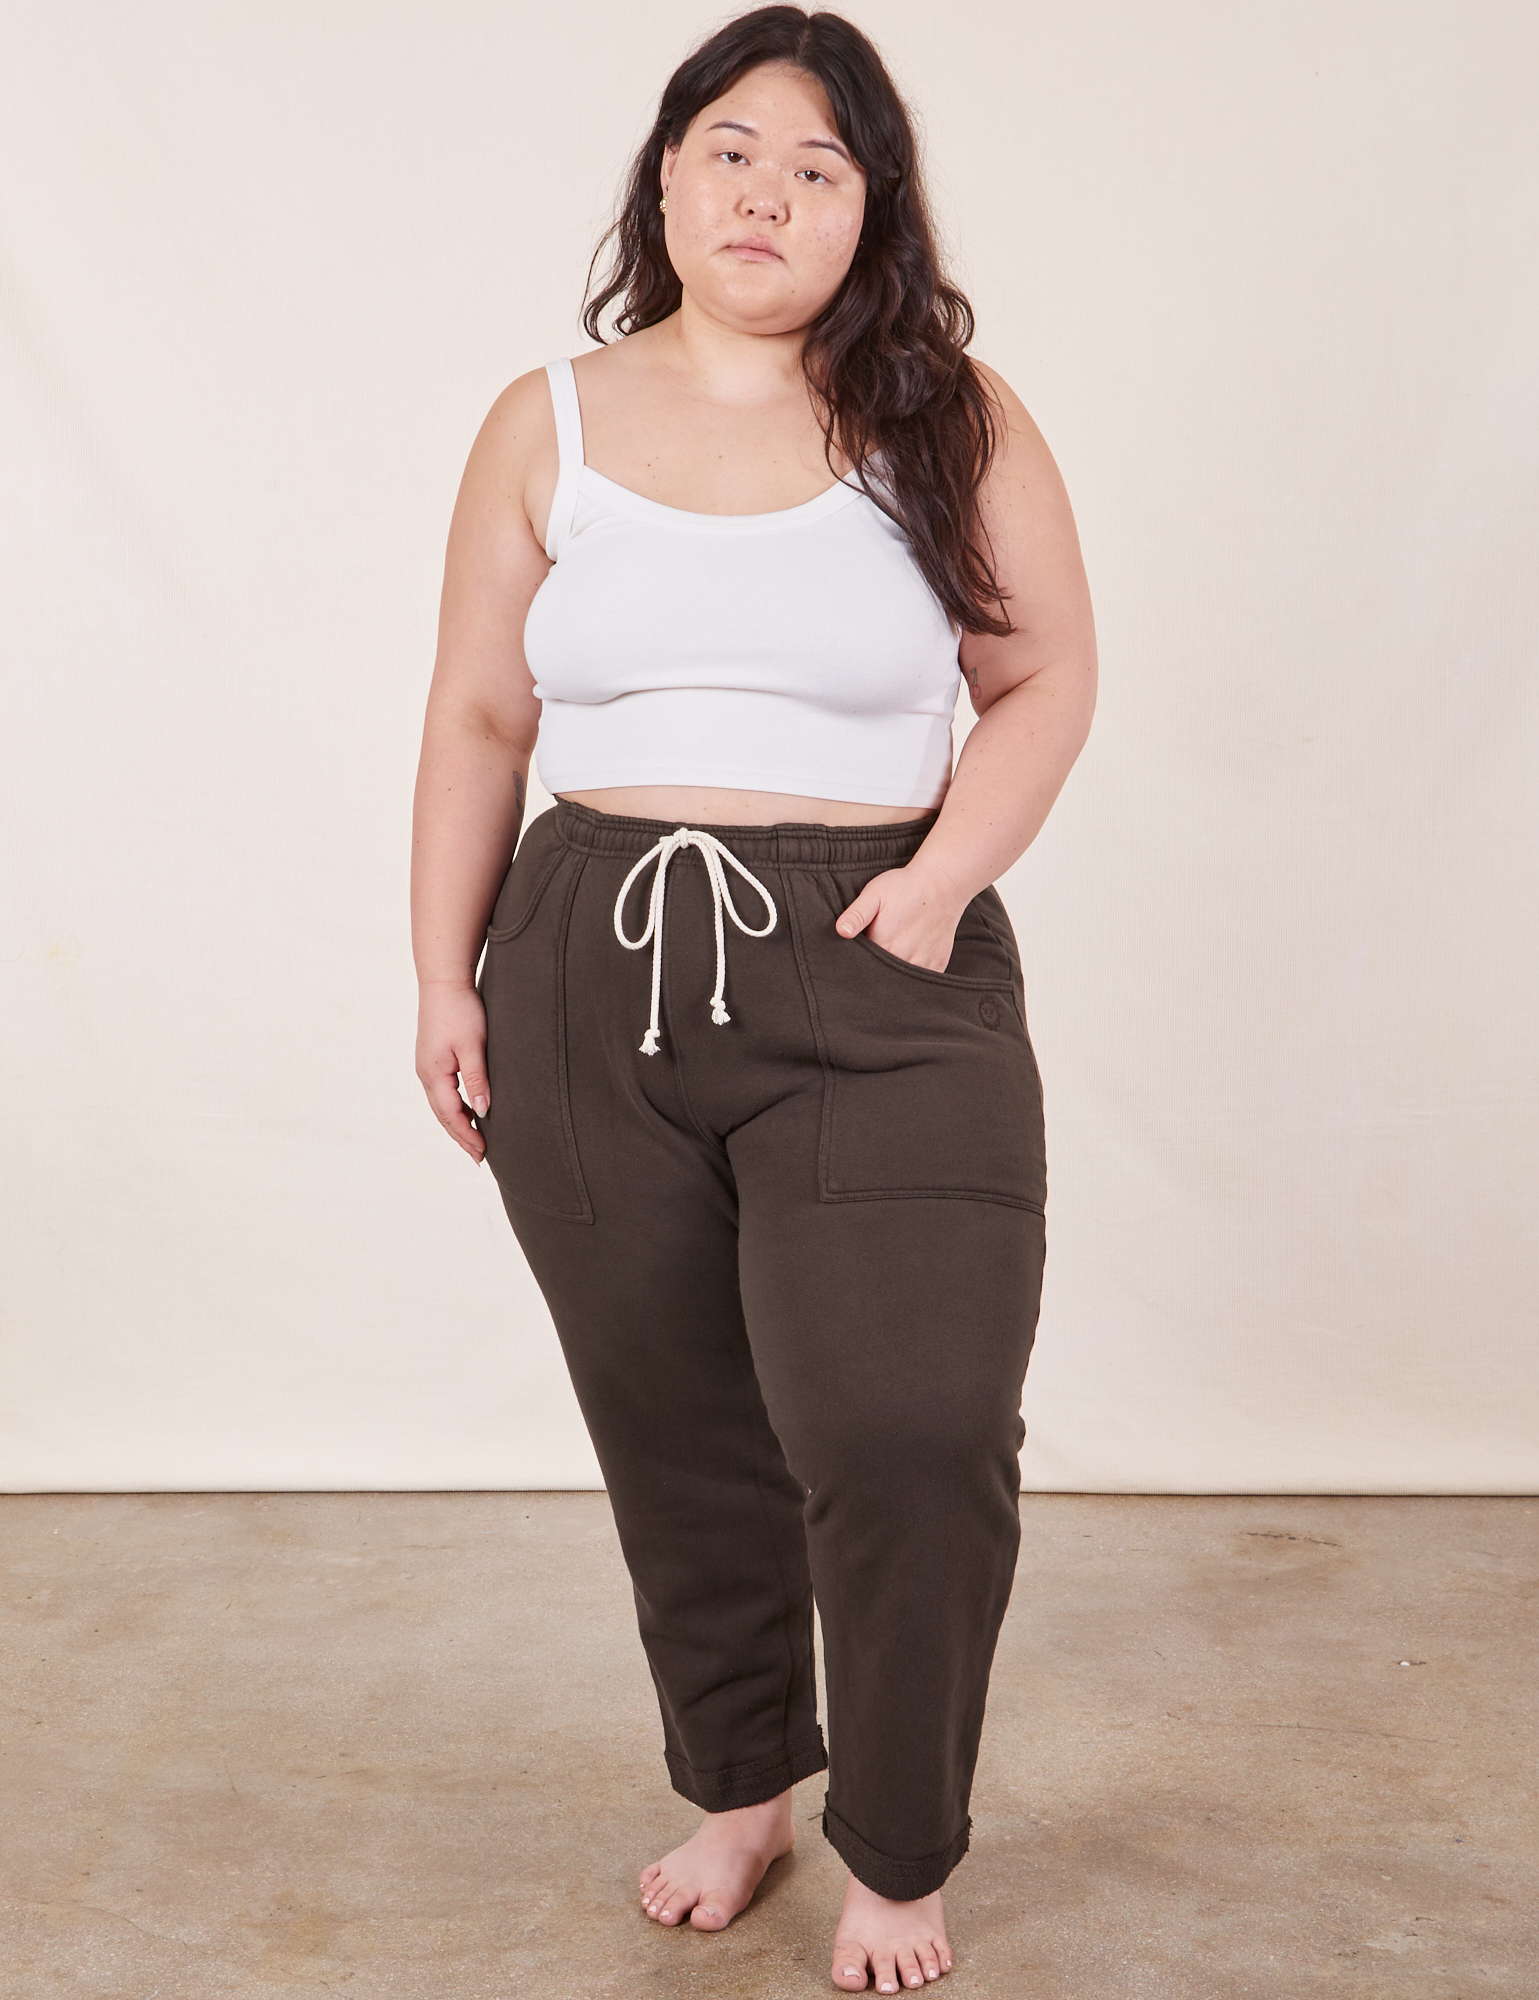 Ashley is 5&#39;7&quot; and wearing XL Cropped Rolled Cuff Sweatpants in Espresso Brown paired with vintage off-white Cami